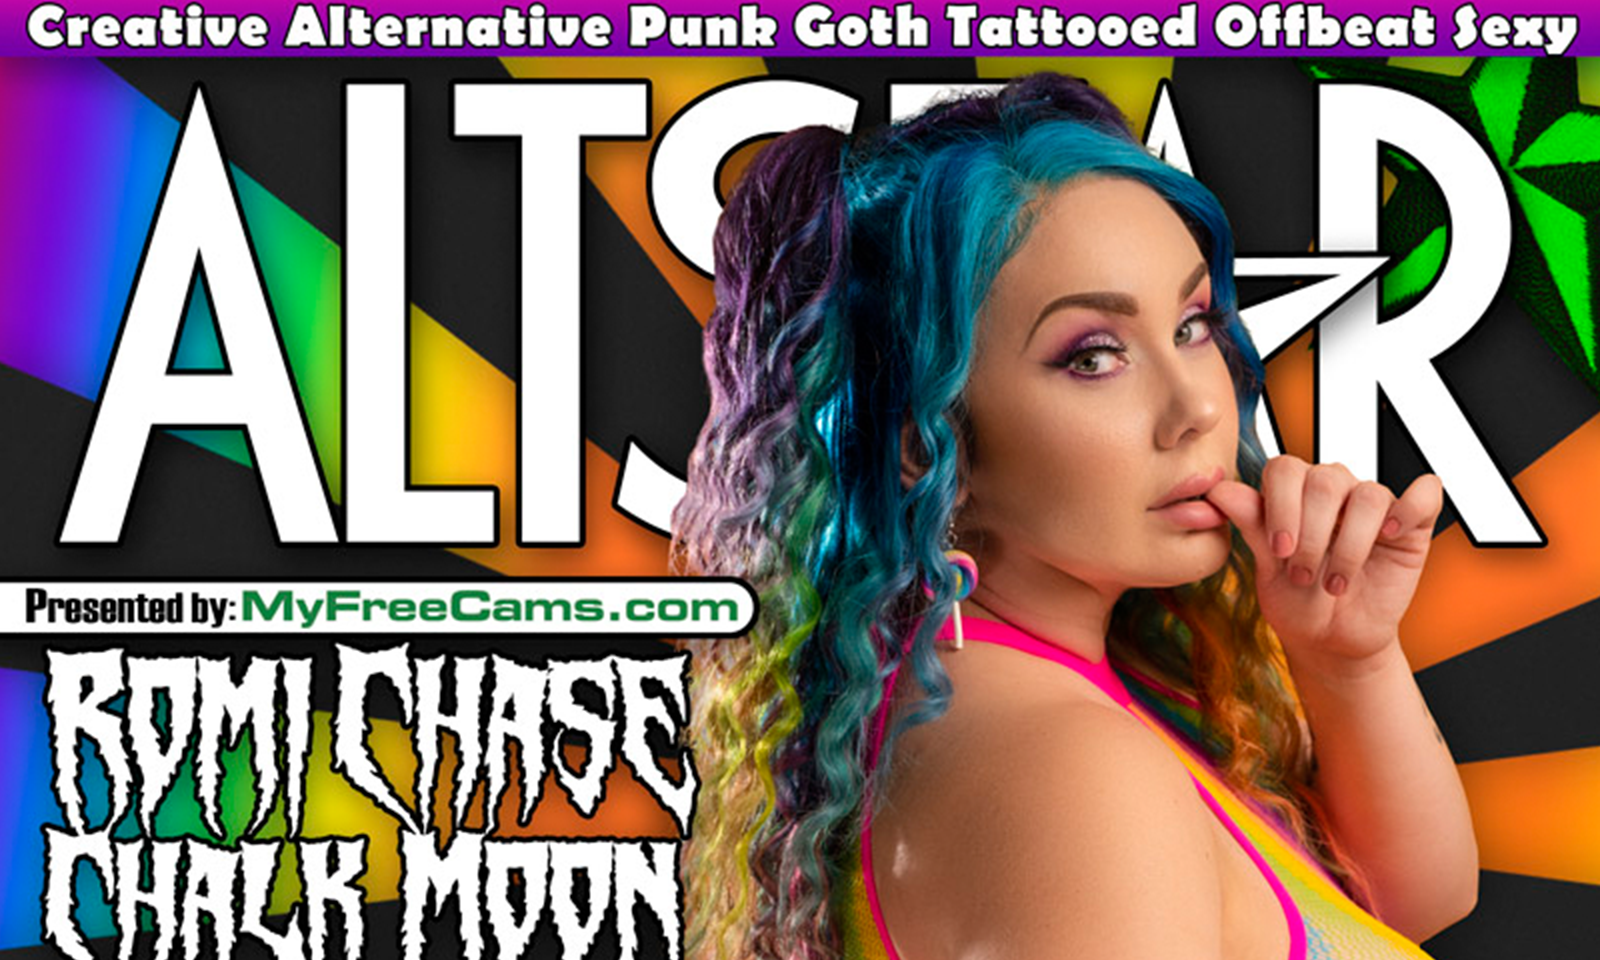 AltStar Magazine Issue #18 Offered Free Courtesy of MyFreeCams